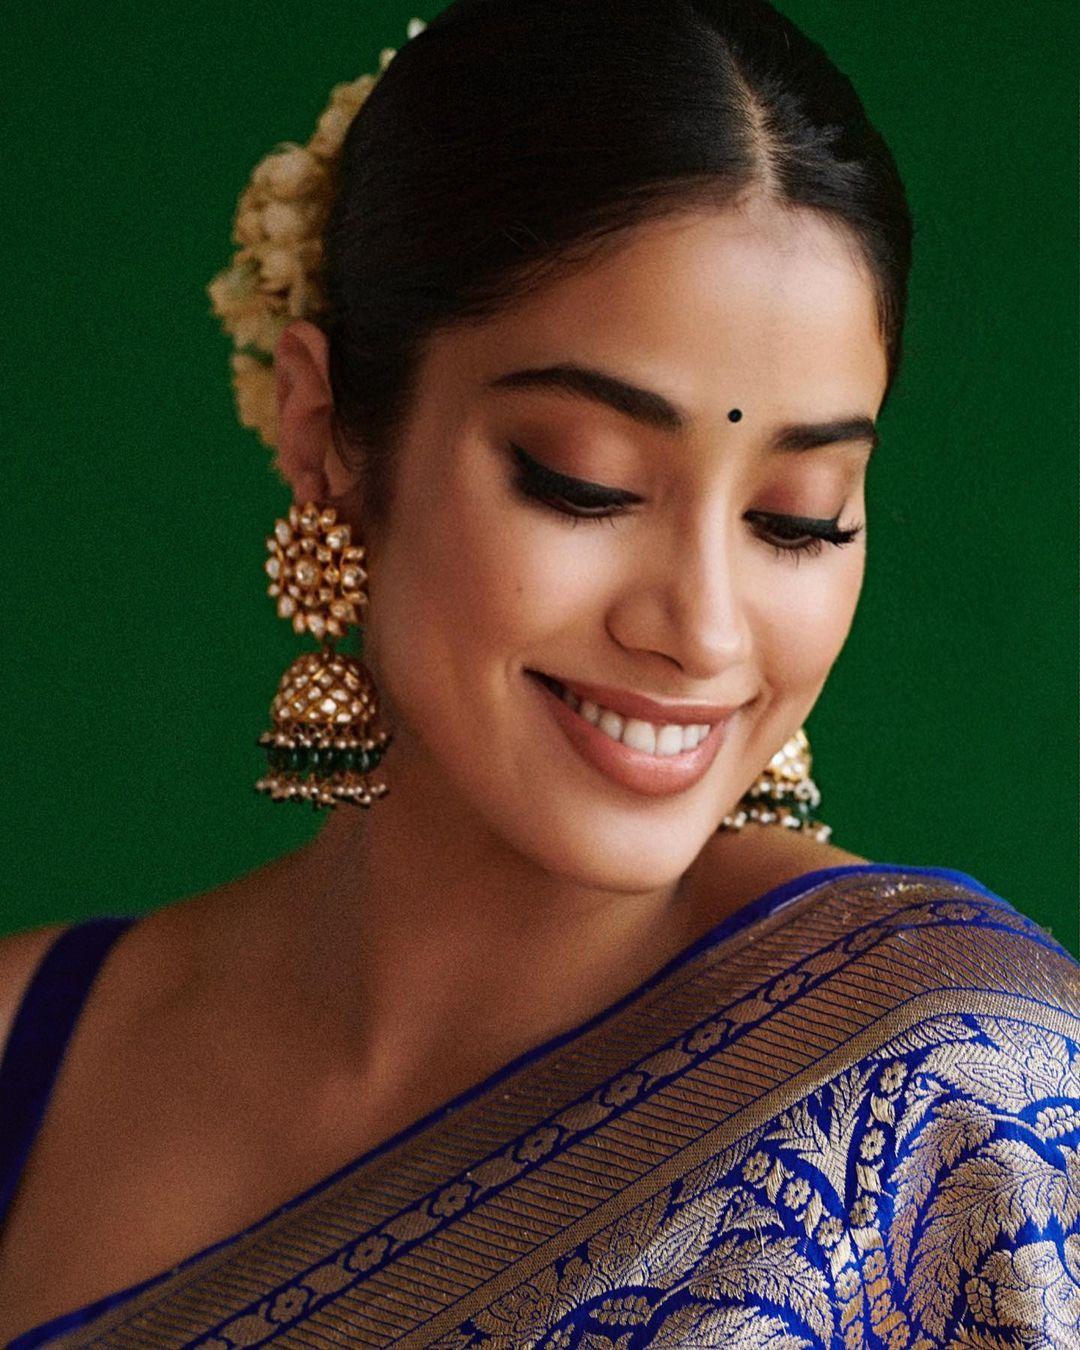 She wears a floral garland in her hair, adding to her elegance. Janhvi complements her saree with bold jhumkas, giving her outfit a traditional yet glamorous vibe.